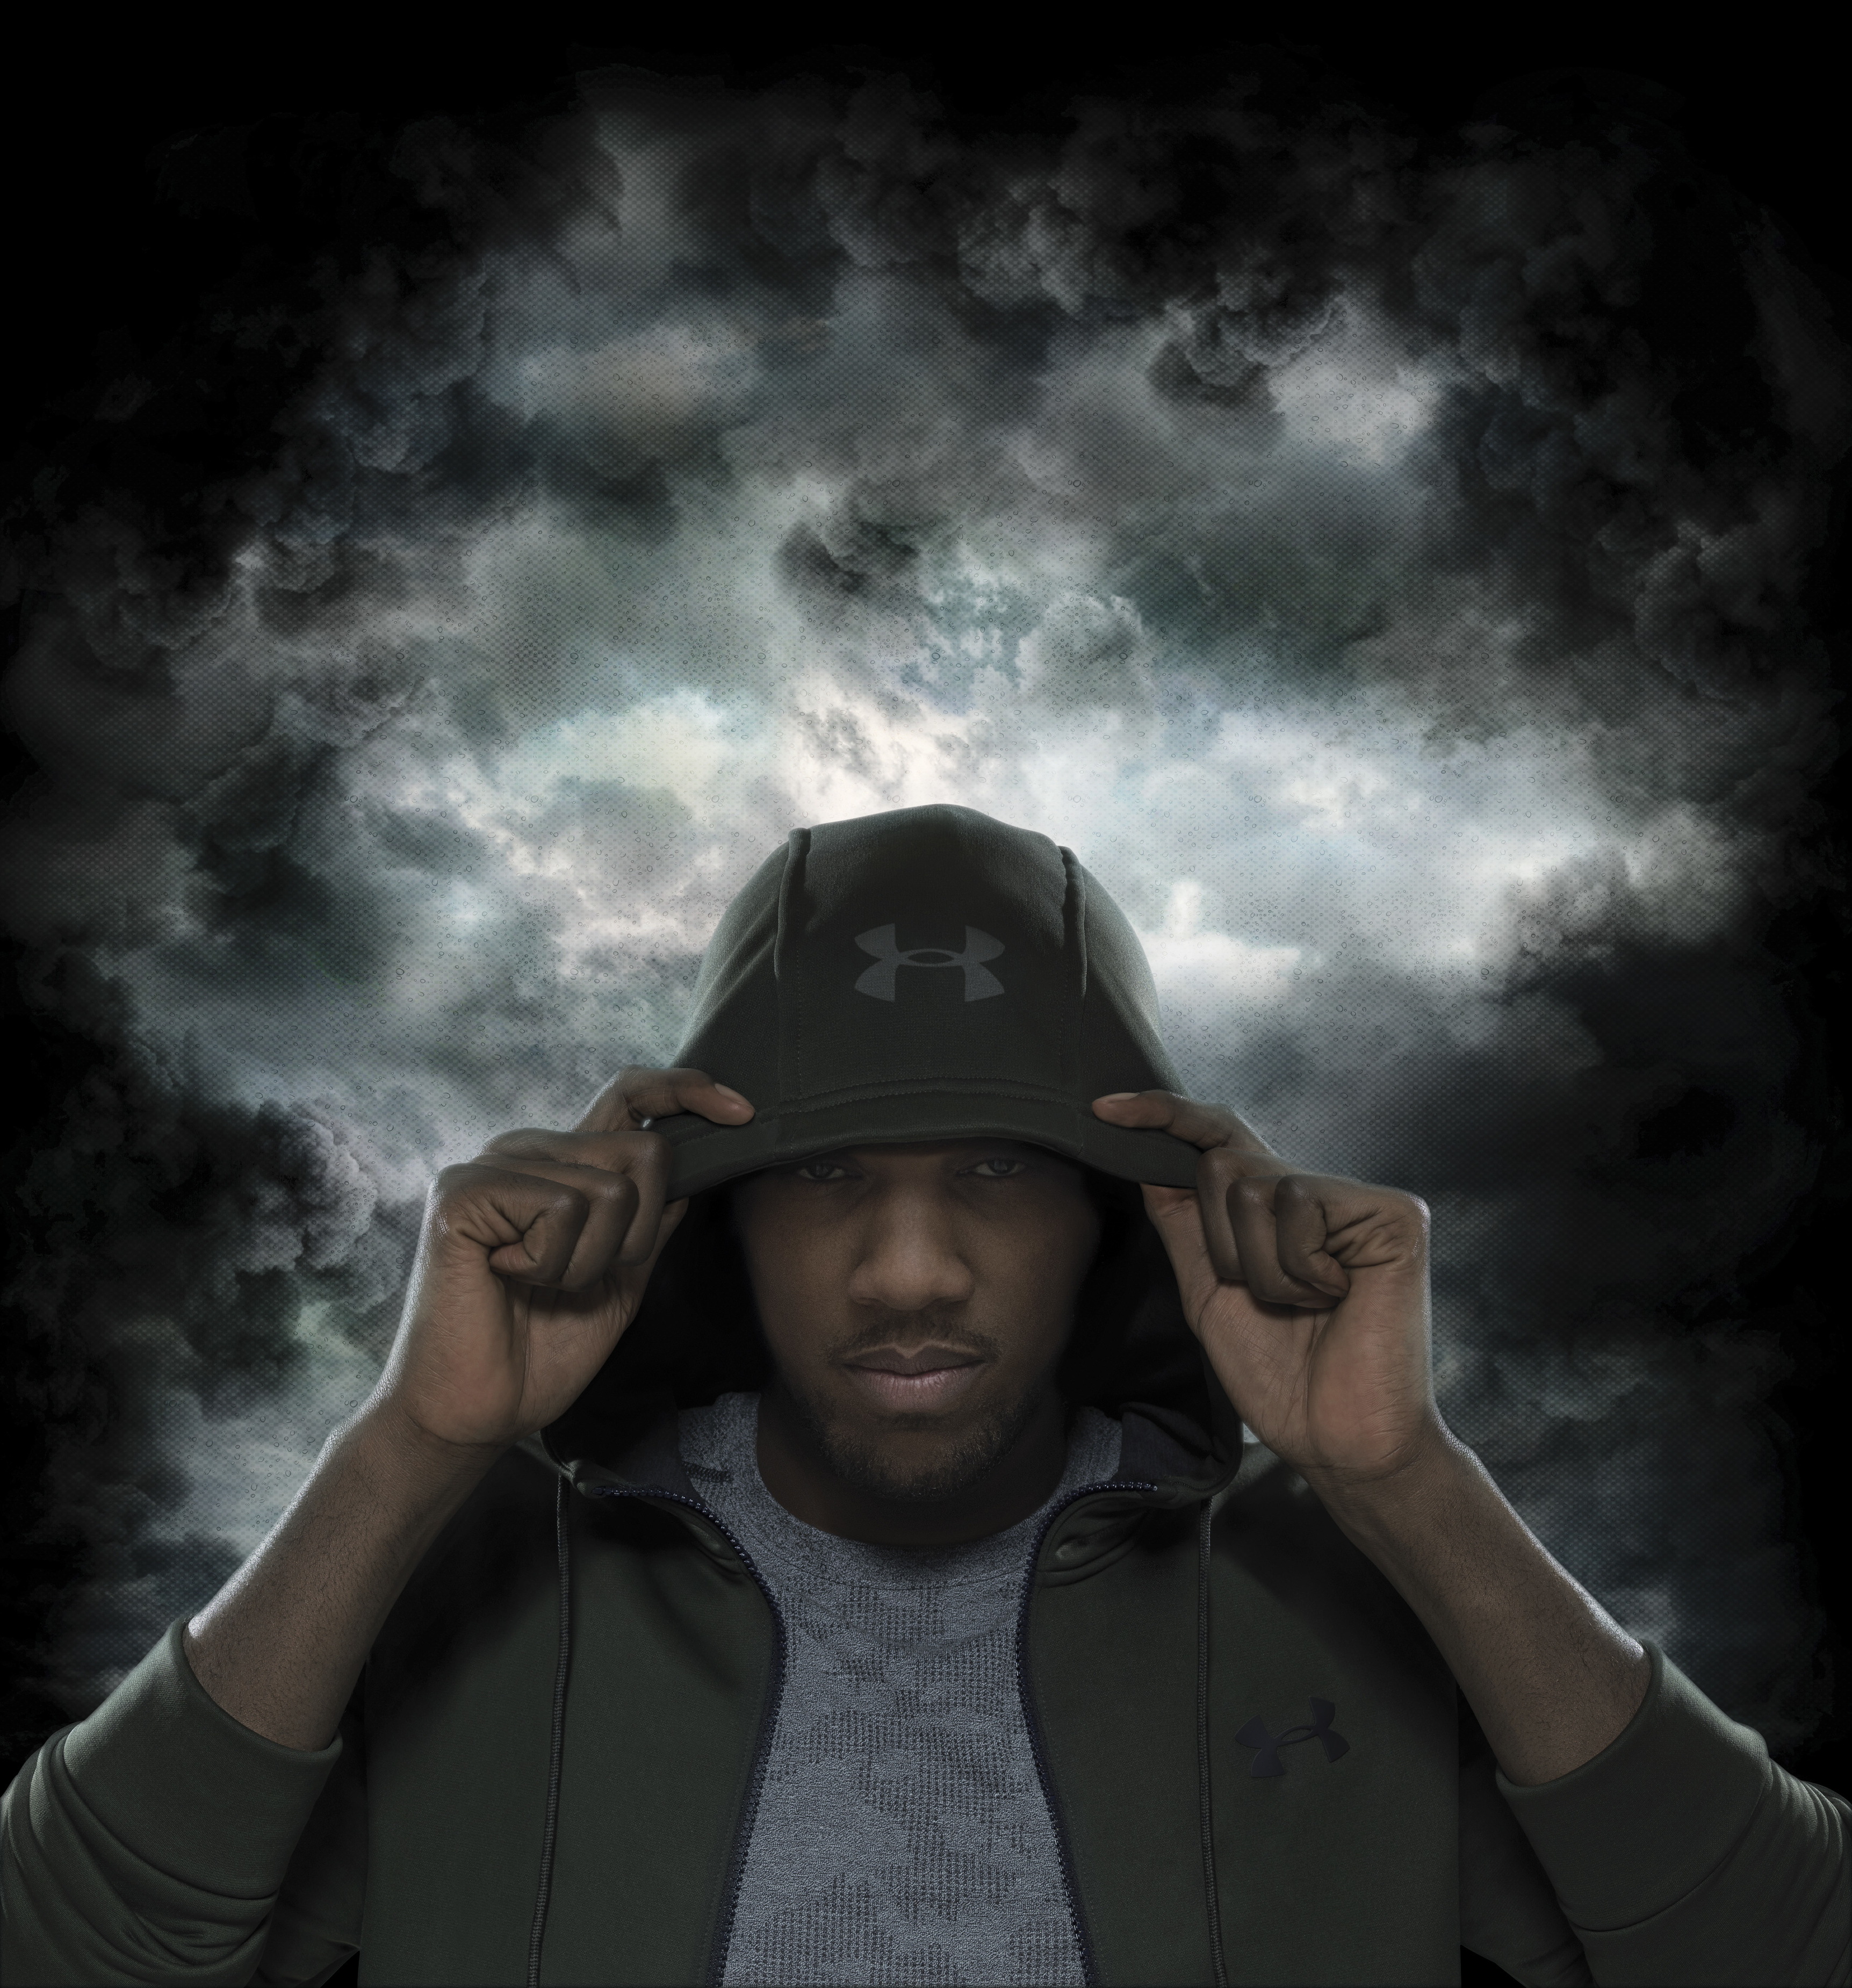 creative production featuring Anthony Joshua on a stormy background